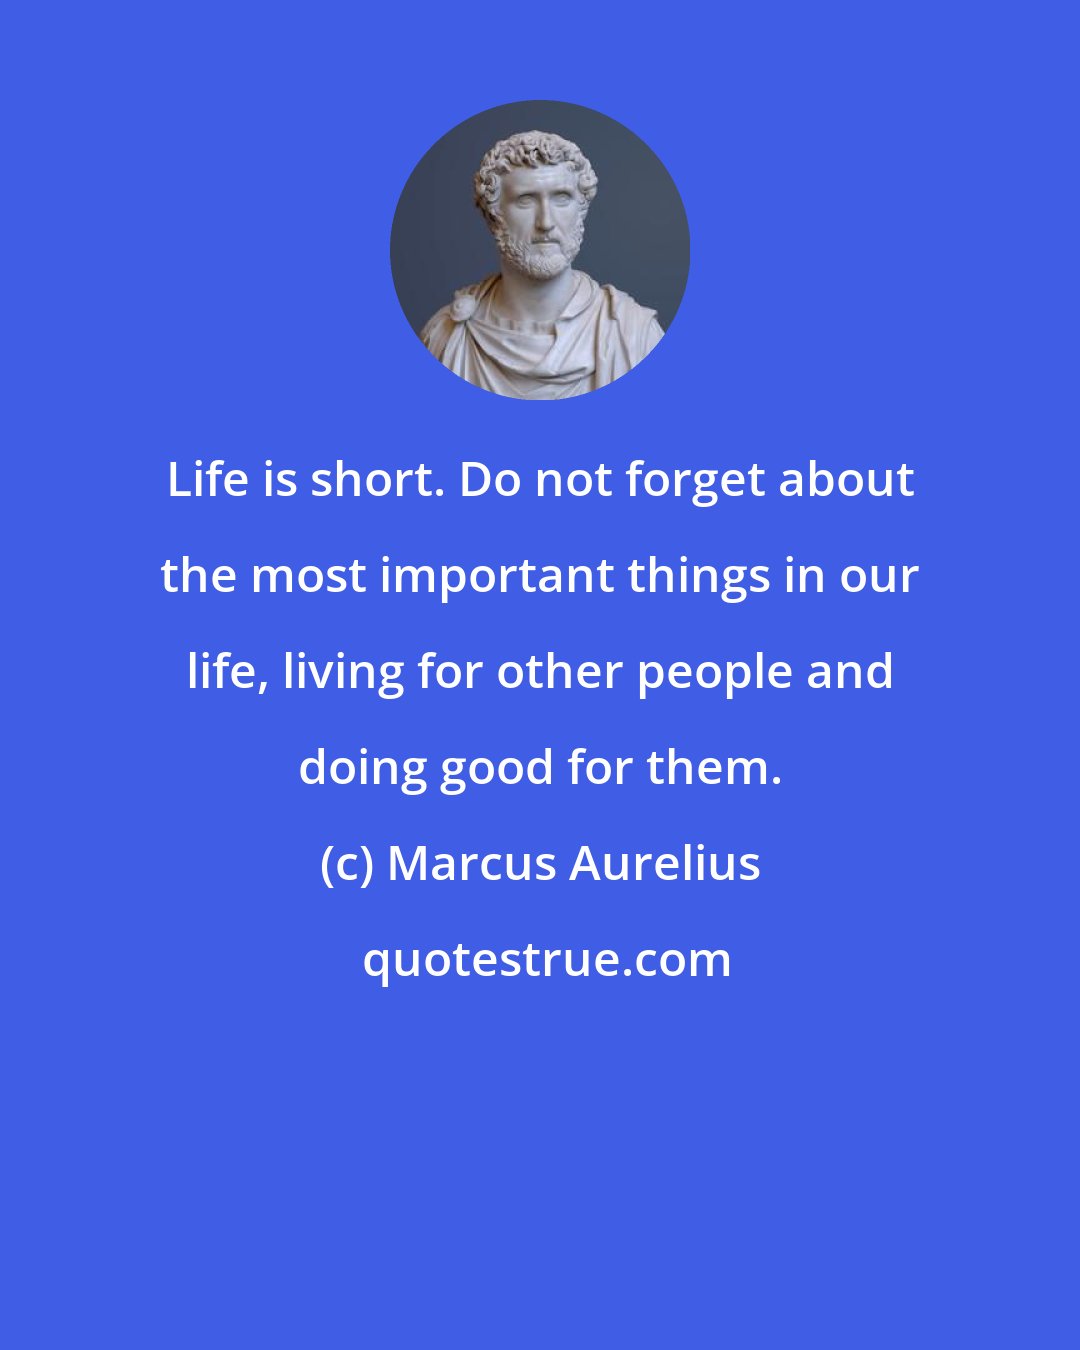 Marcus Aurelius: Life is short. Do not forget about the most important things in our life, living for other people and doing good for them.